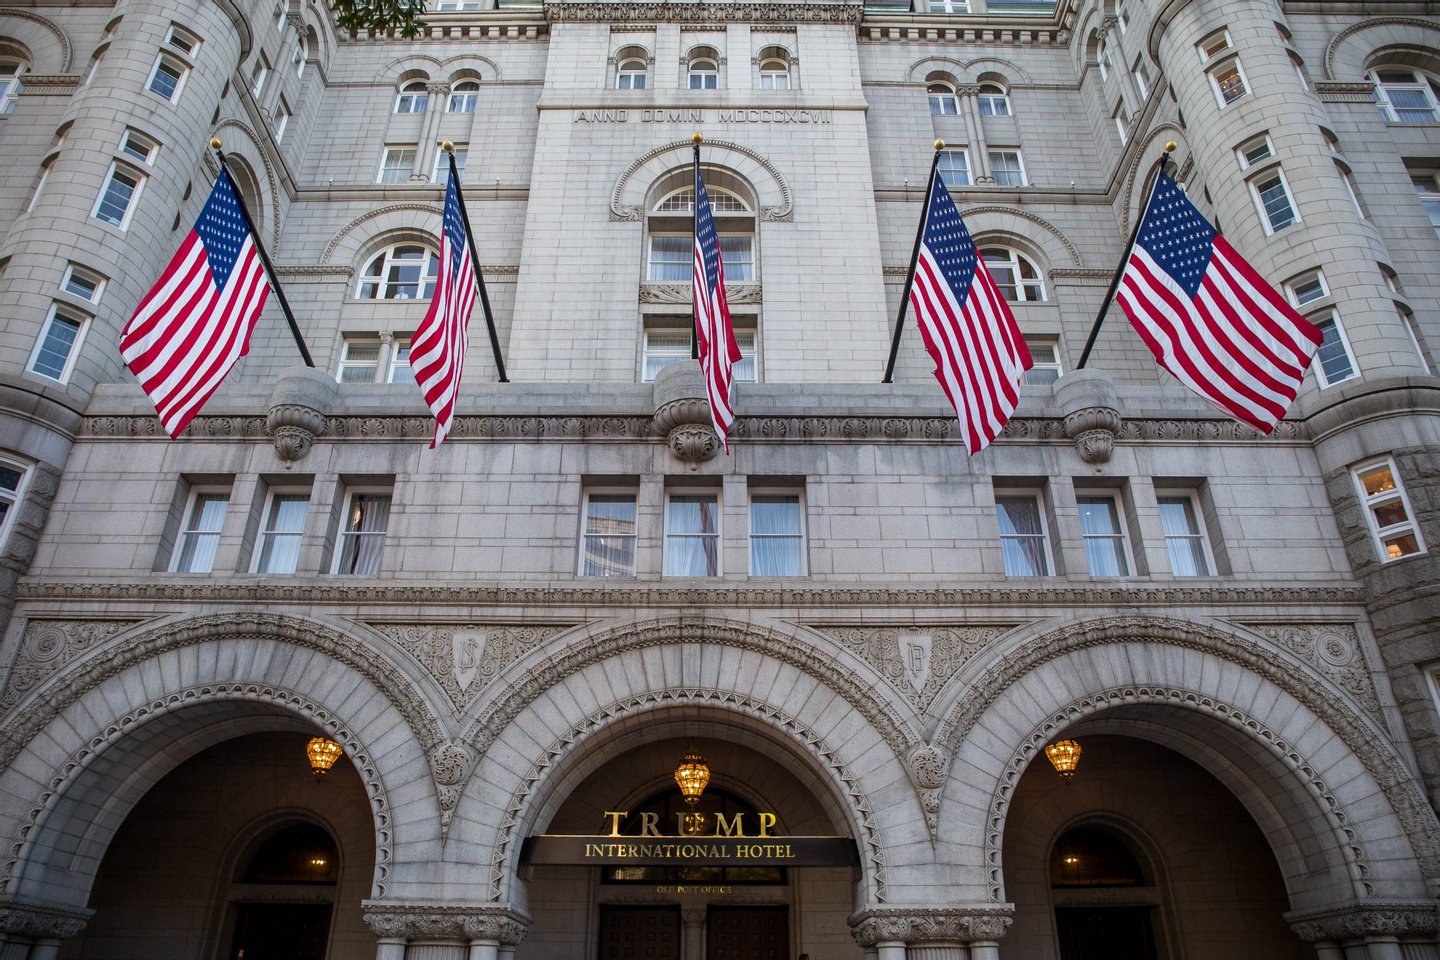 The Trump International Hotel, Washington is pictured before its grand opening October 26, 2016 in Washington, DC. / AFP / ZACH GIBSON (Photo credit should read ZACH GIBSON/AFP/Getty Images)